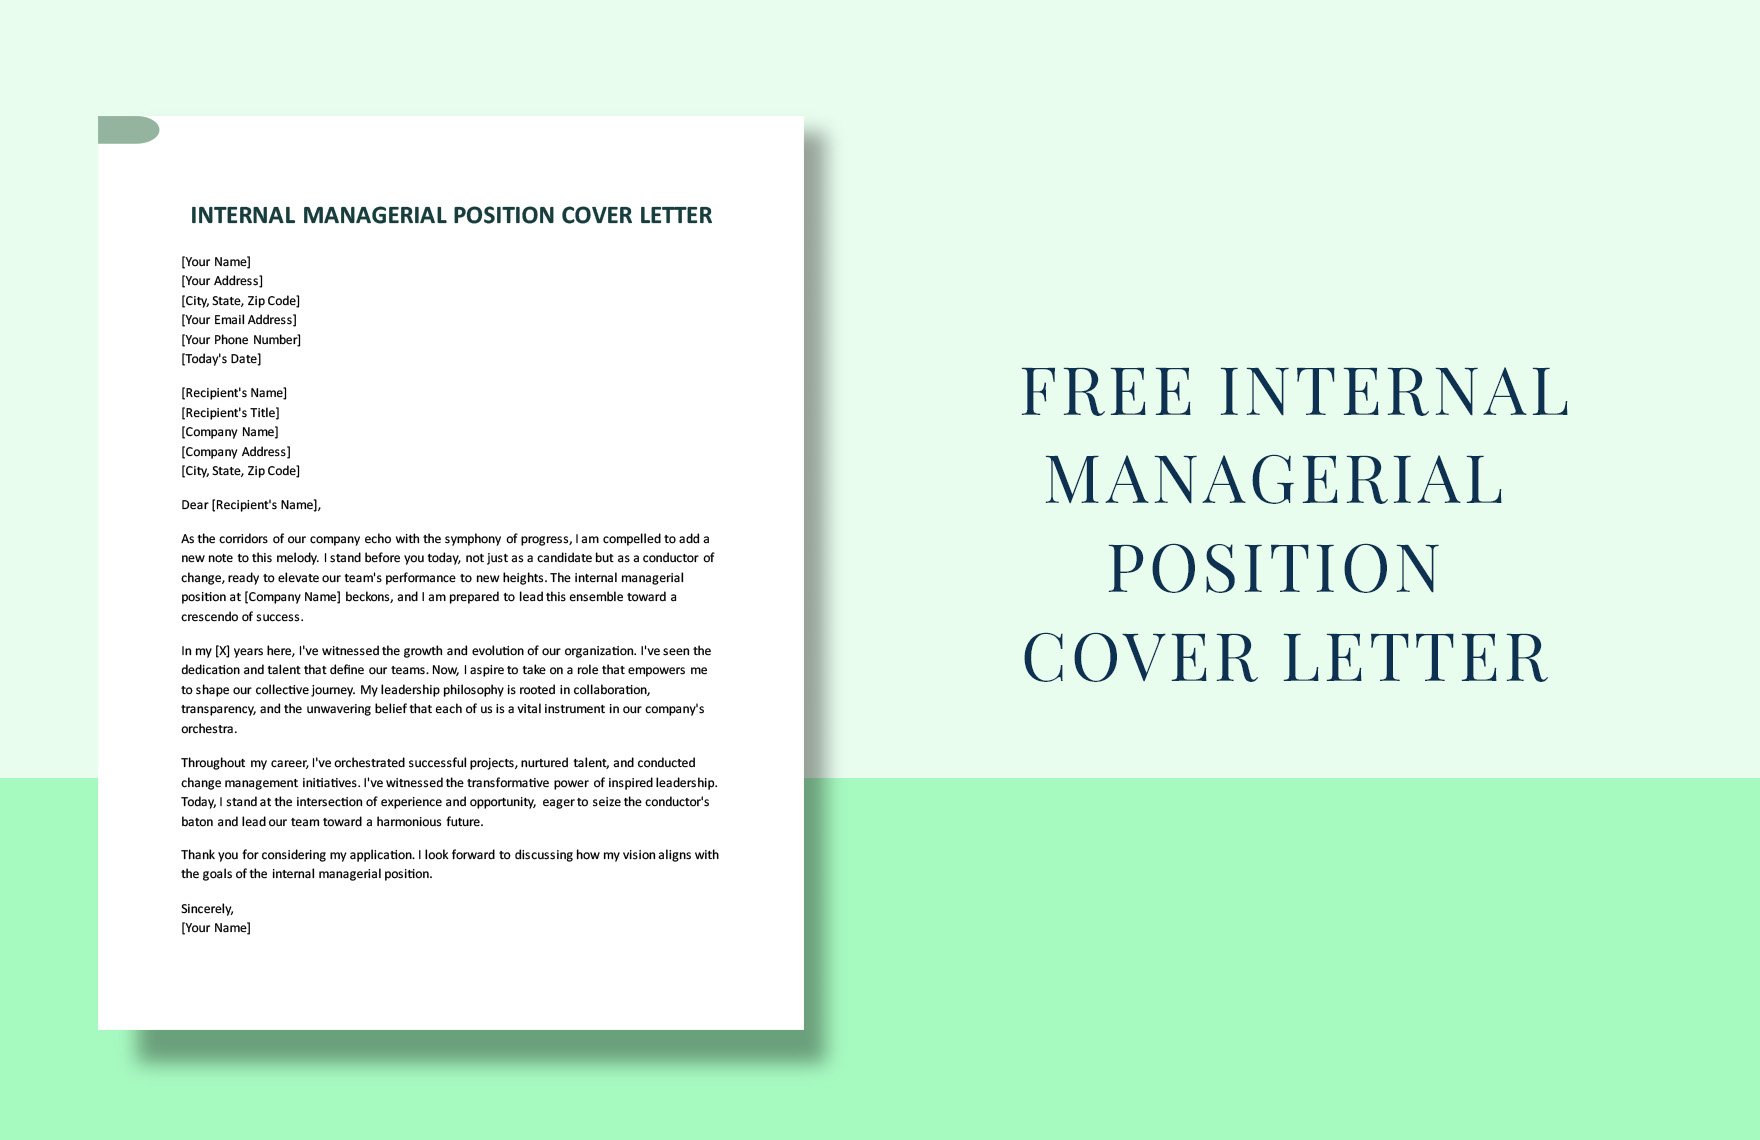 Internal Managerial Position Cover Letter